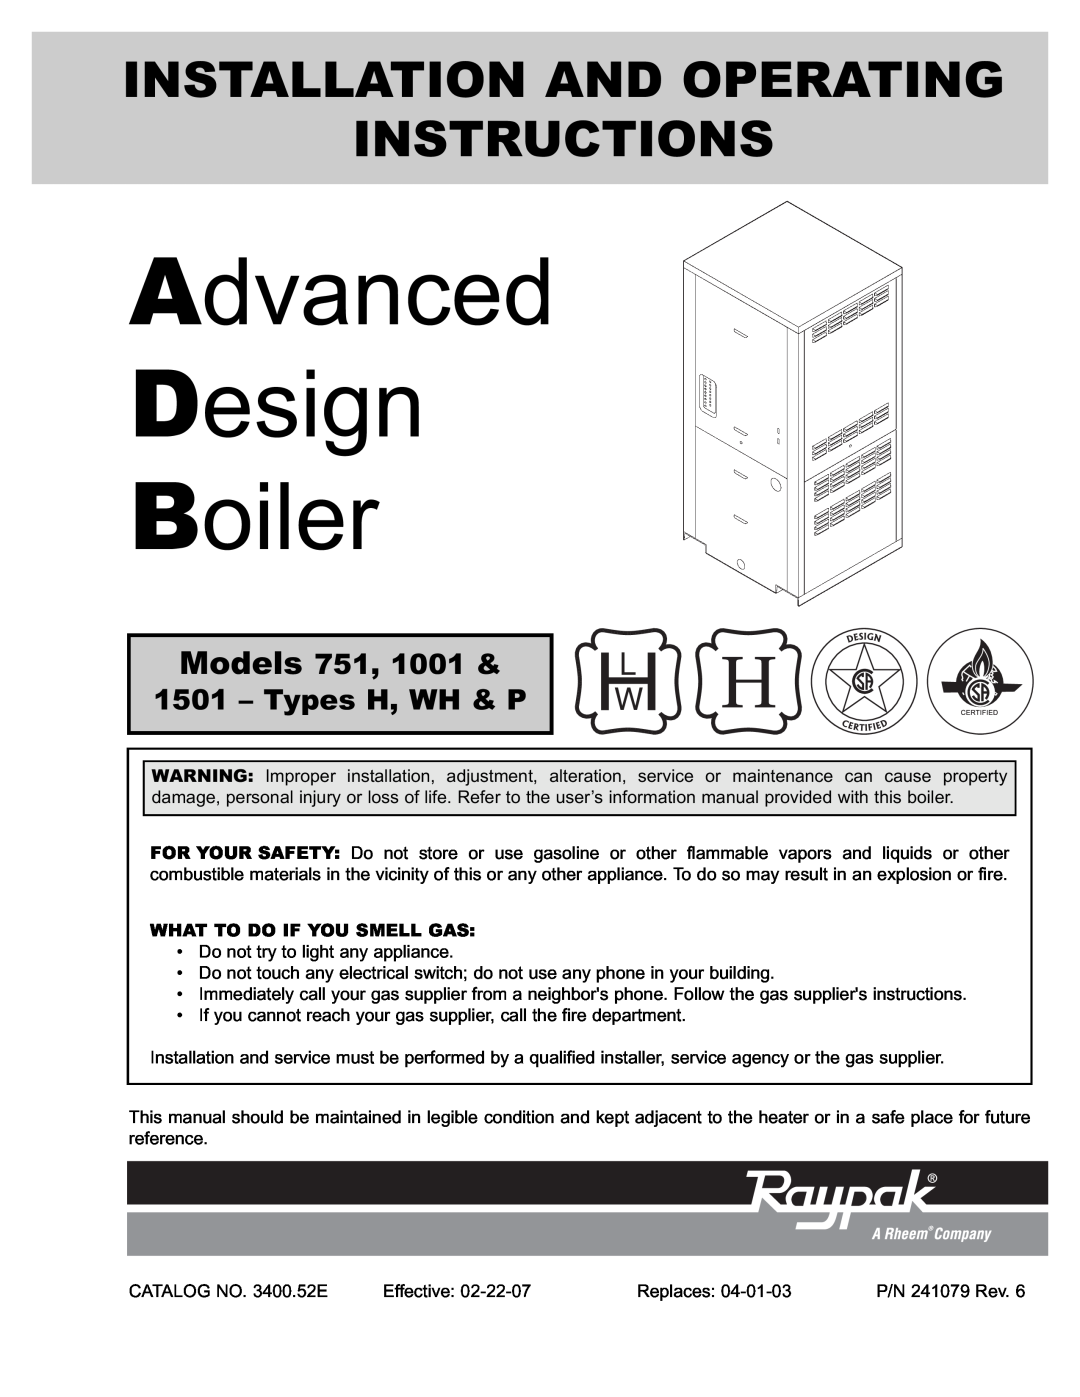 Raypak 751 manual Advanced Design Boiler, Installation And Operating Instructions, What To Do If You Smell Gas 